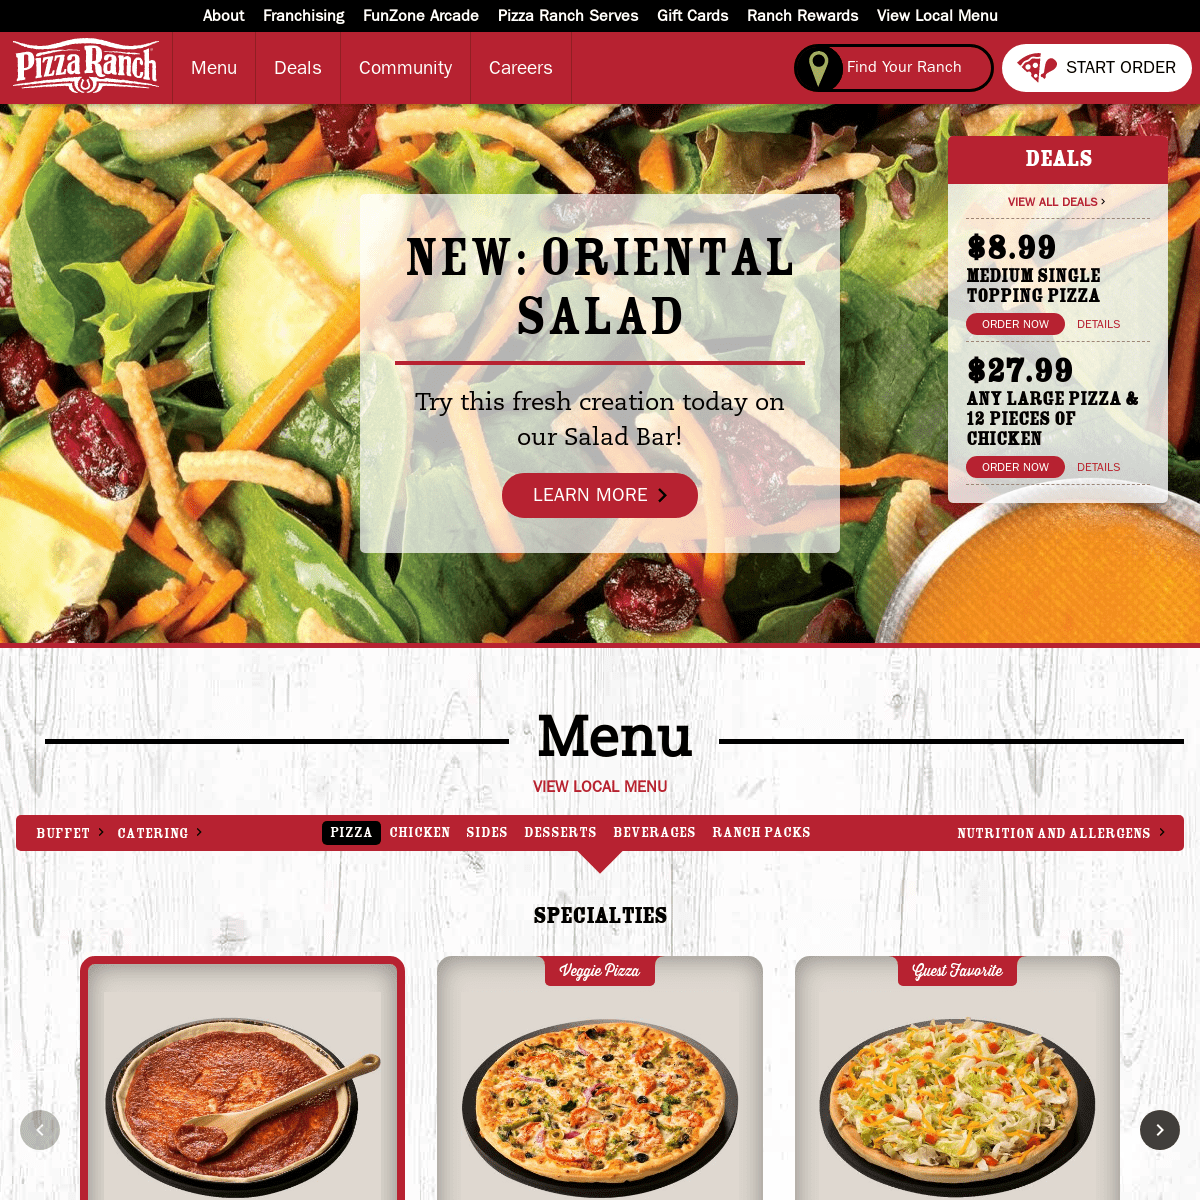 A complete backup of pizzaranch.com